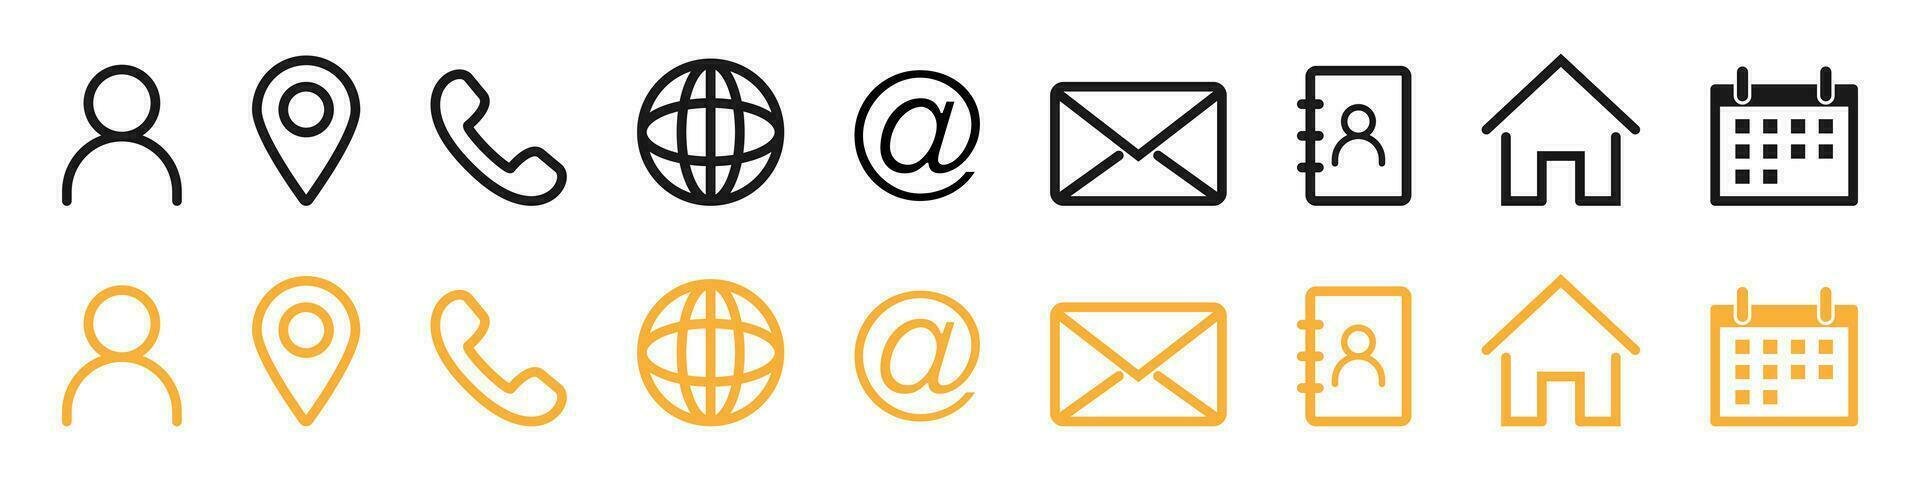 Contact icons collection. Contact us set in outline style. Avatar, location, phone and website symbol.  Mail envelope and calendar sign. Contact collection. Vector illustration. EPS 10.